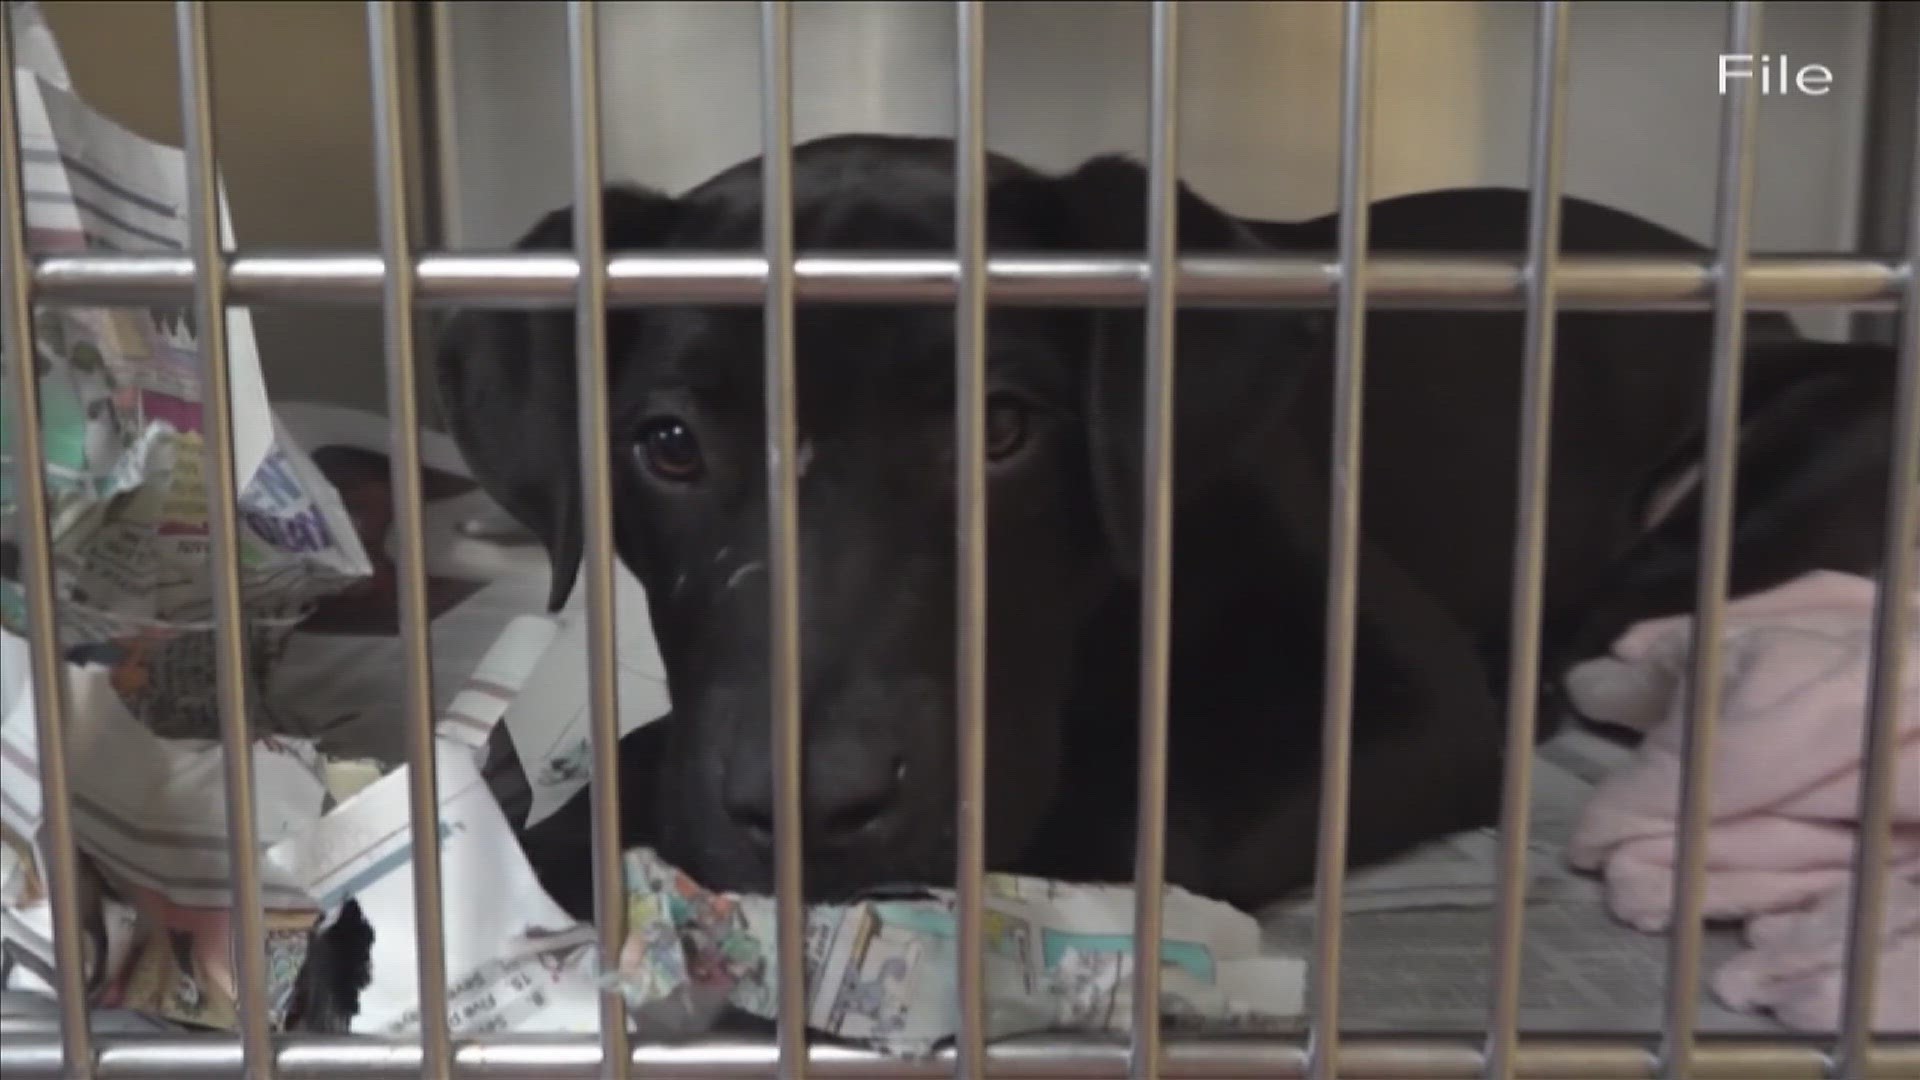 MAS is offering just a $10 adoption fee — down from fees that can typically get as high as $80.